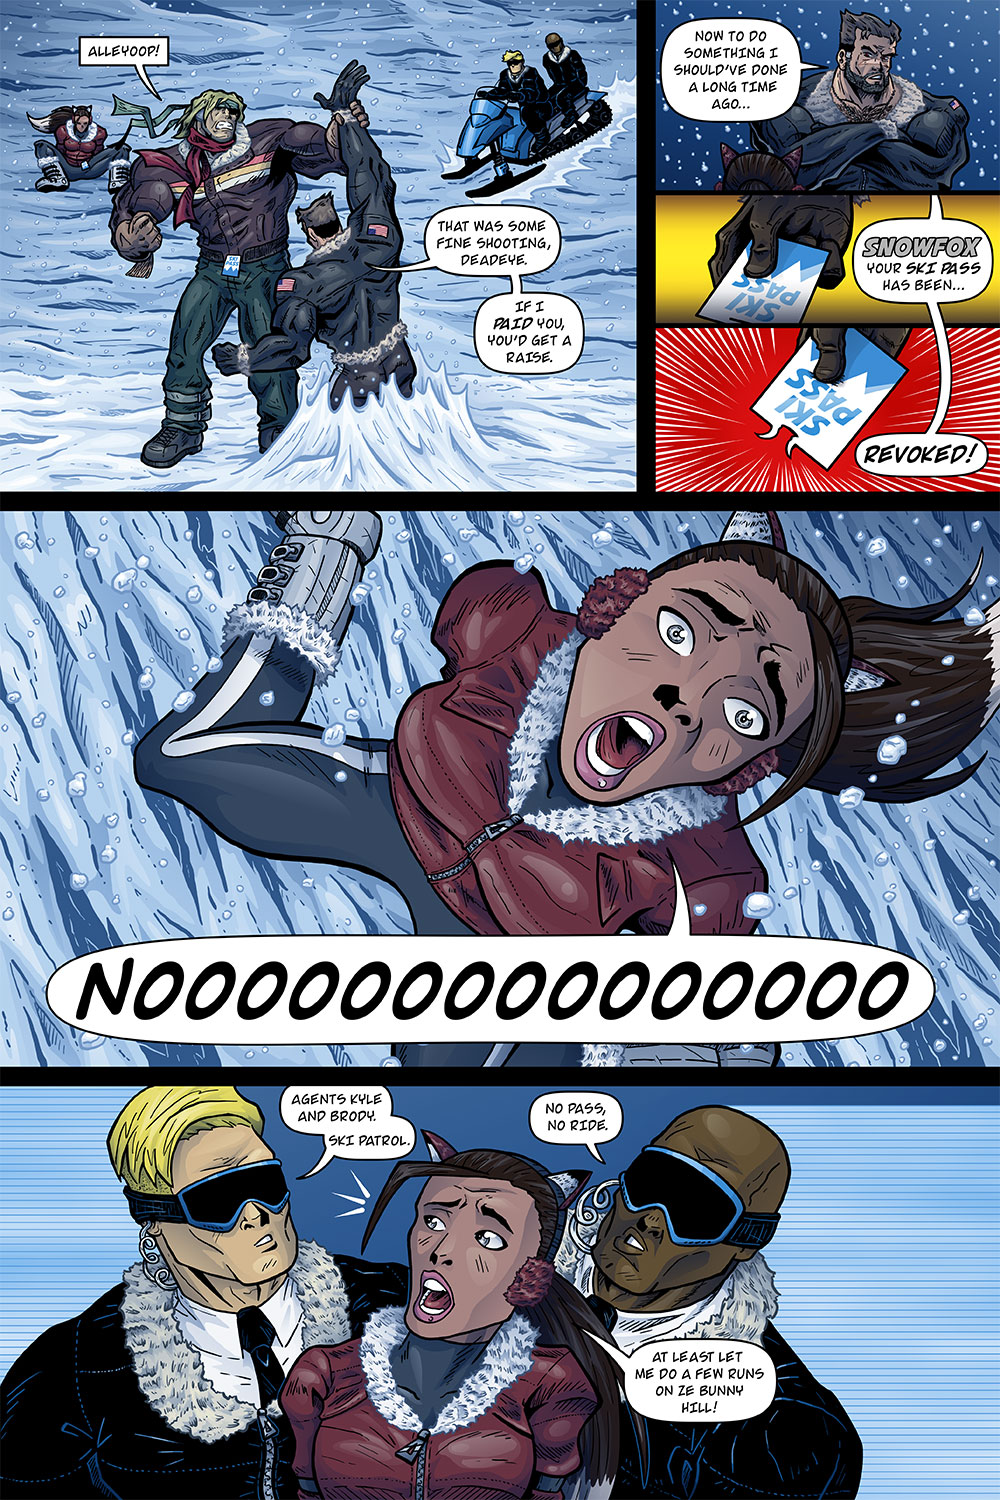 MISSION 012: PAGE 23 “REVOKED!”